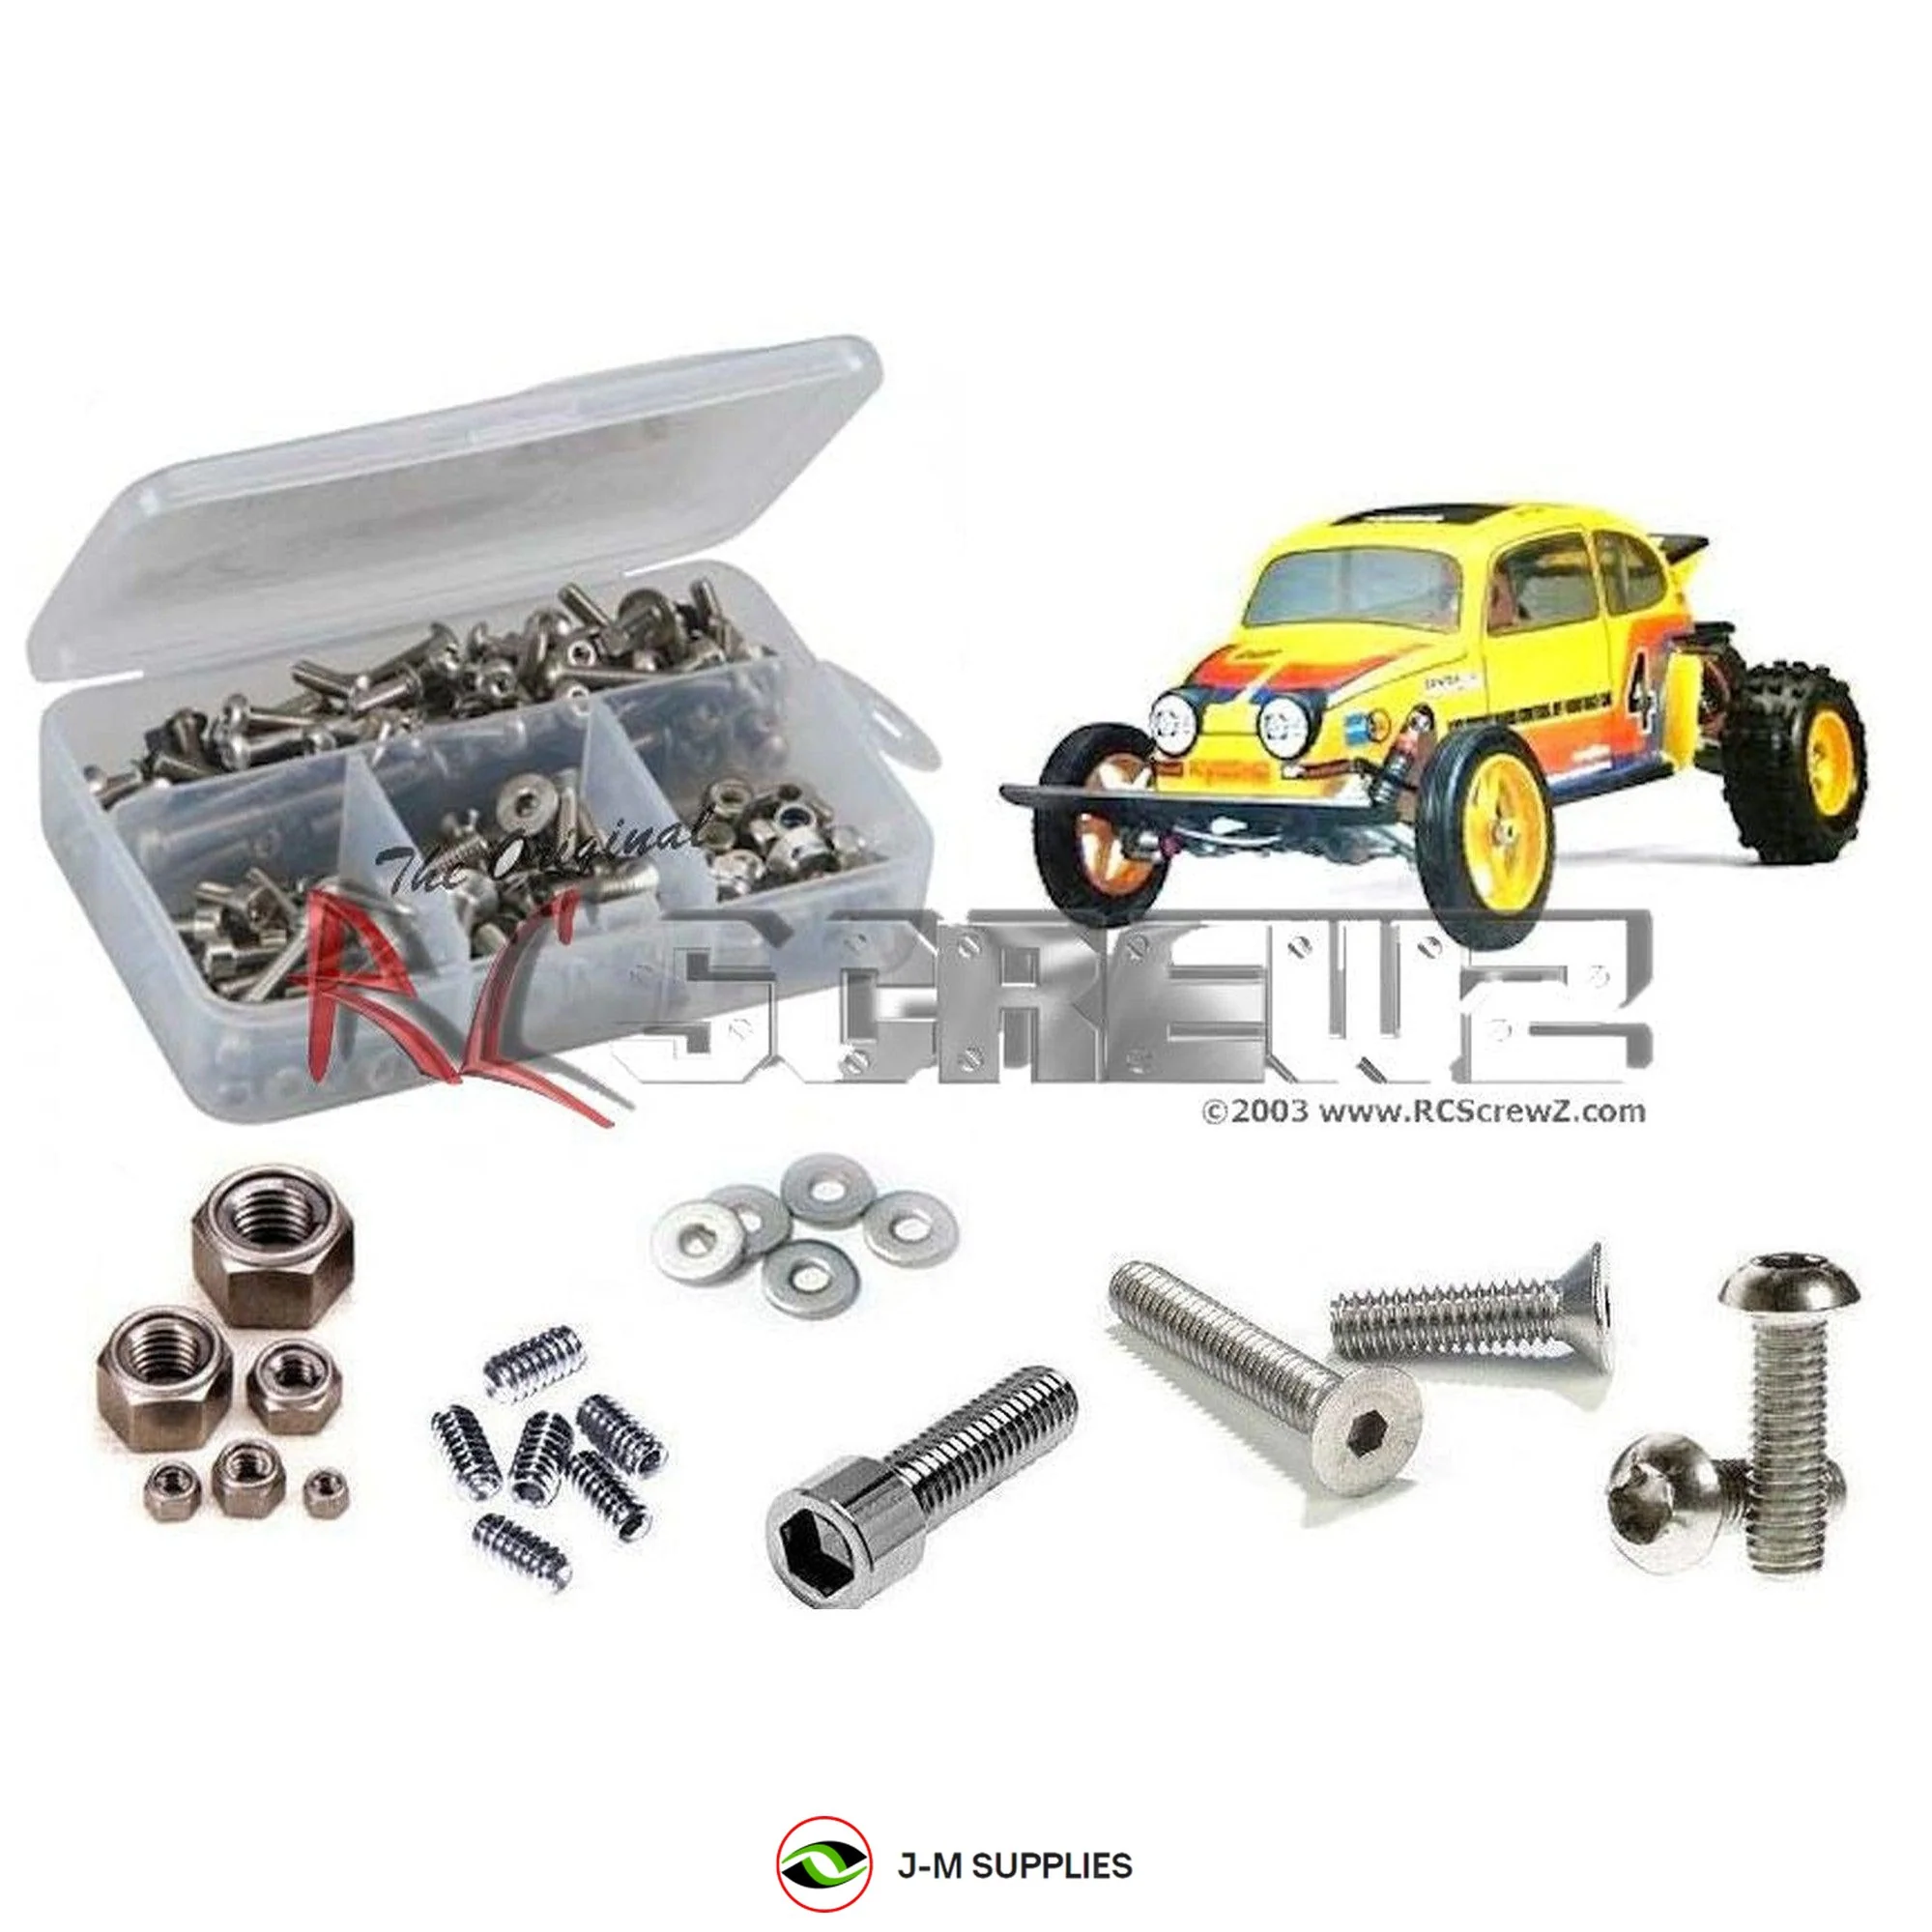 RCScrewZ Stainless Screw Kit kyo153 for Kyosho Beetle Racer 2014 1/10 2WD #30614 - Picture 1 of 12